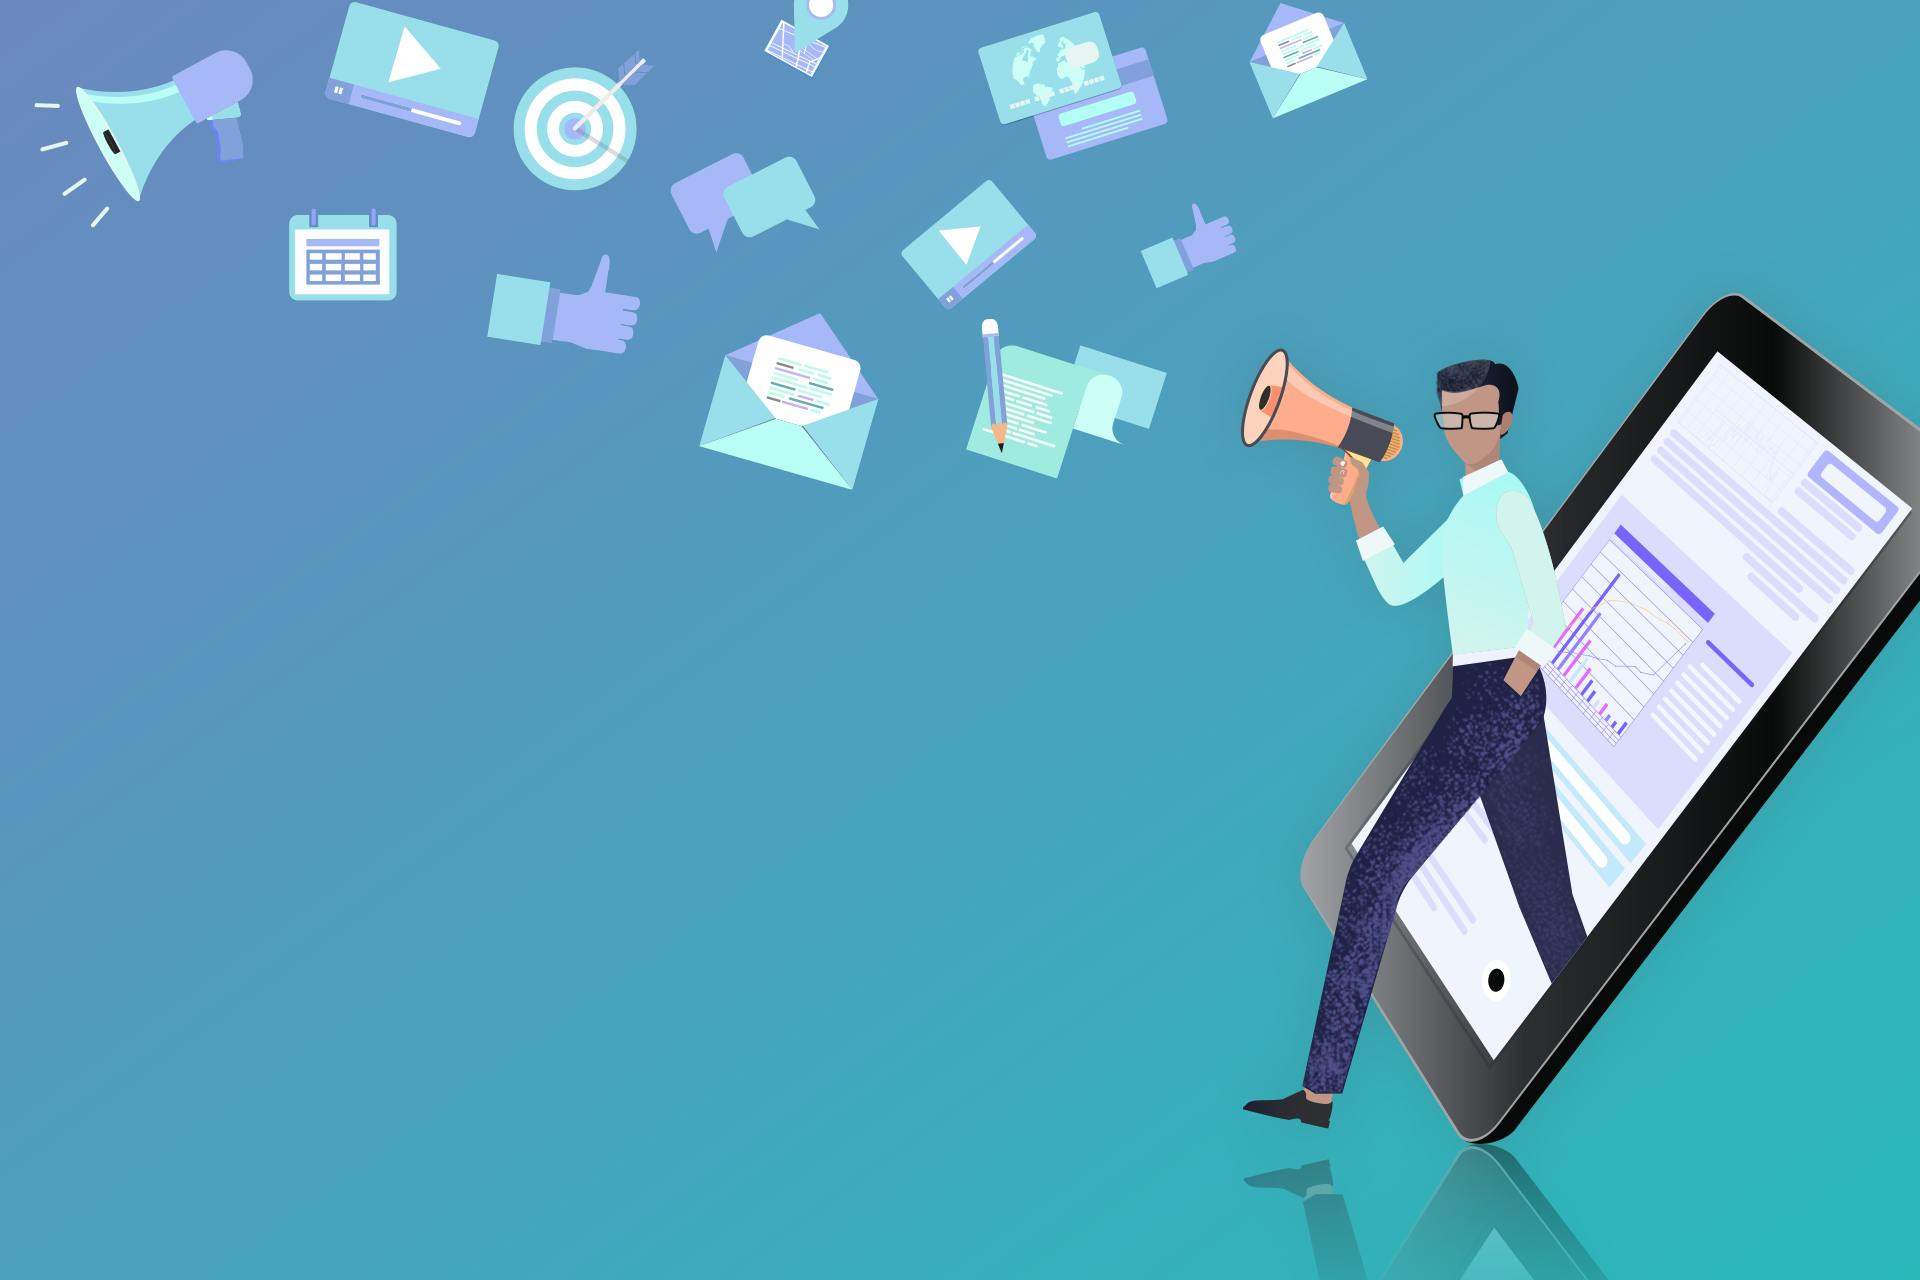 A cartoon image of a man stepping out of an iPad holding a megaphone. Different icons, like an email, calendar and Facebook "Like" button, hover above his head. The icons represent all of the different forms of content marketing, such as email marketing, social media marketing, etc.